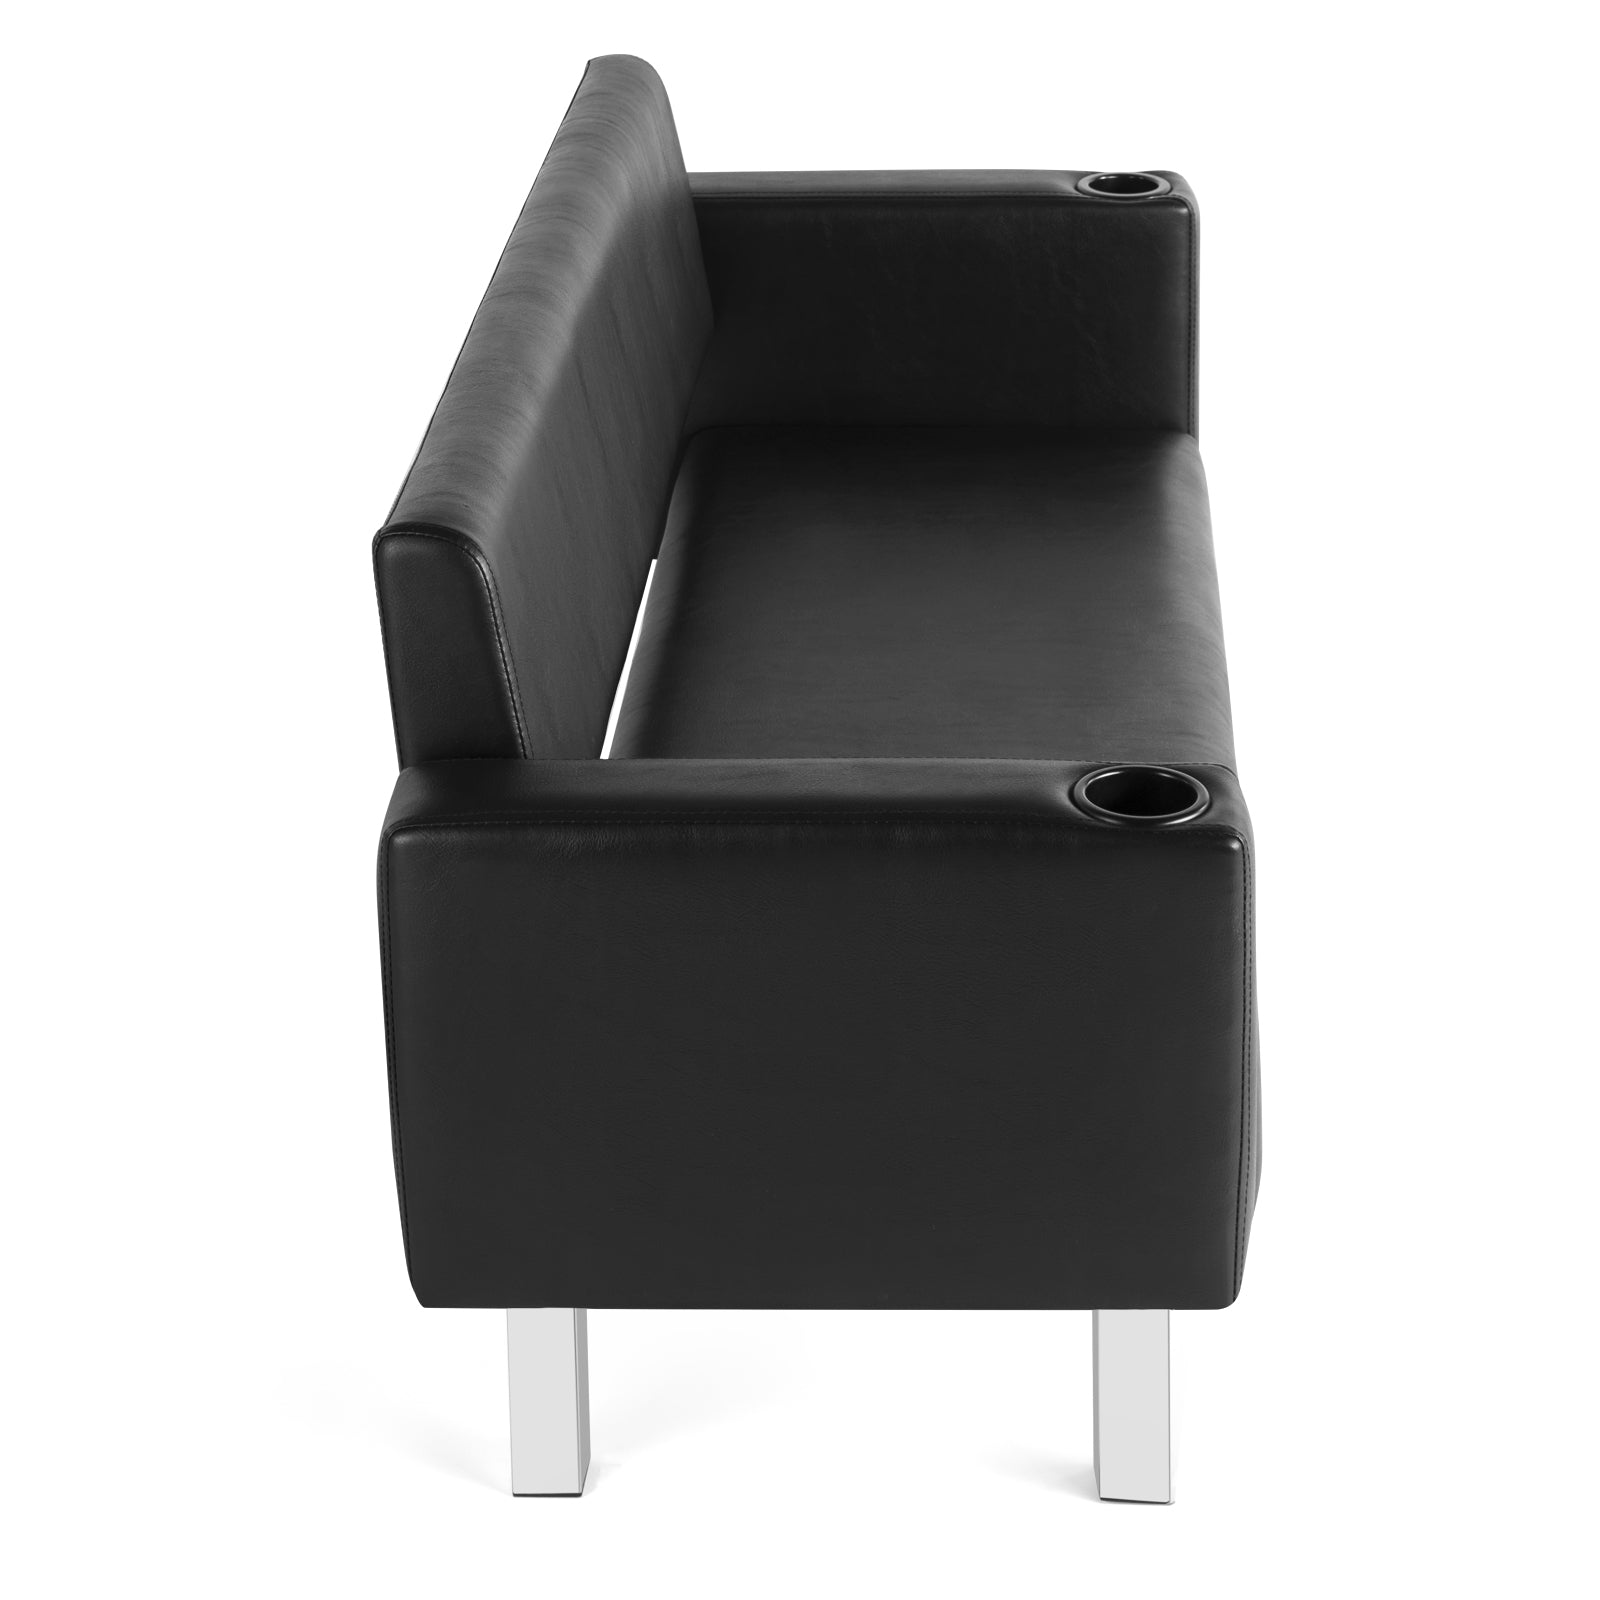 #1003 Office Reception Chairs Waiting Room Bench Guest Chairs Draped in PVC Leather, Leather Bench 60.6'' Conference Room Chairs with 2 Cup Holder Office Couch Stainless Steel Base Chair ASIN：B0C4PLXN31